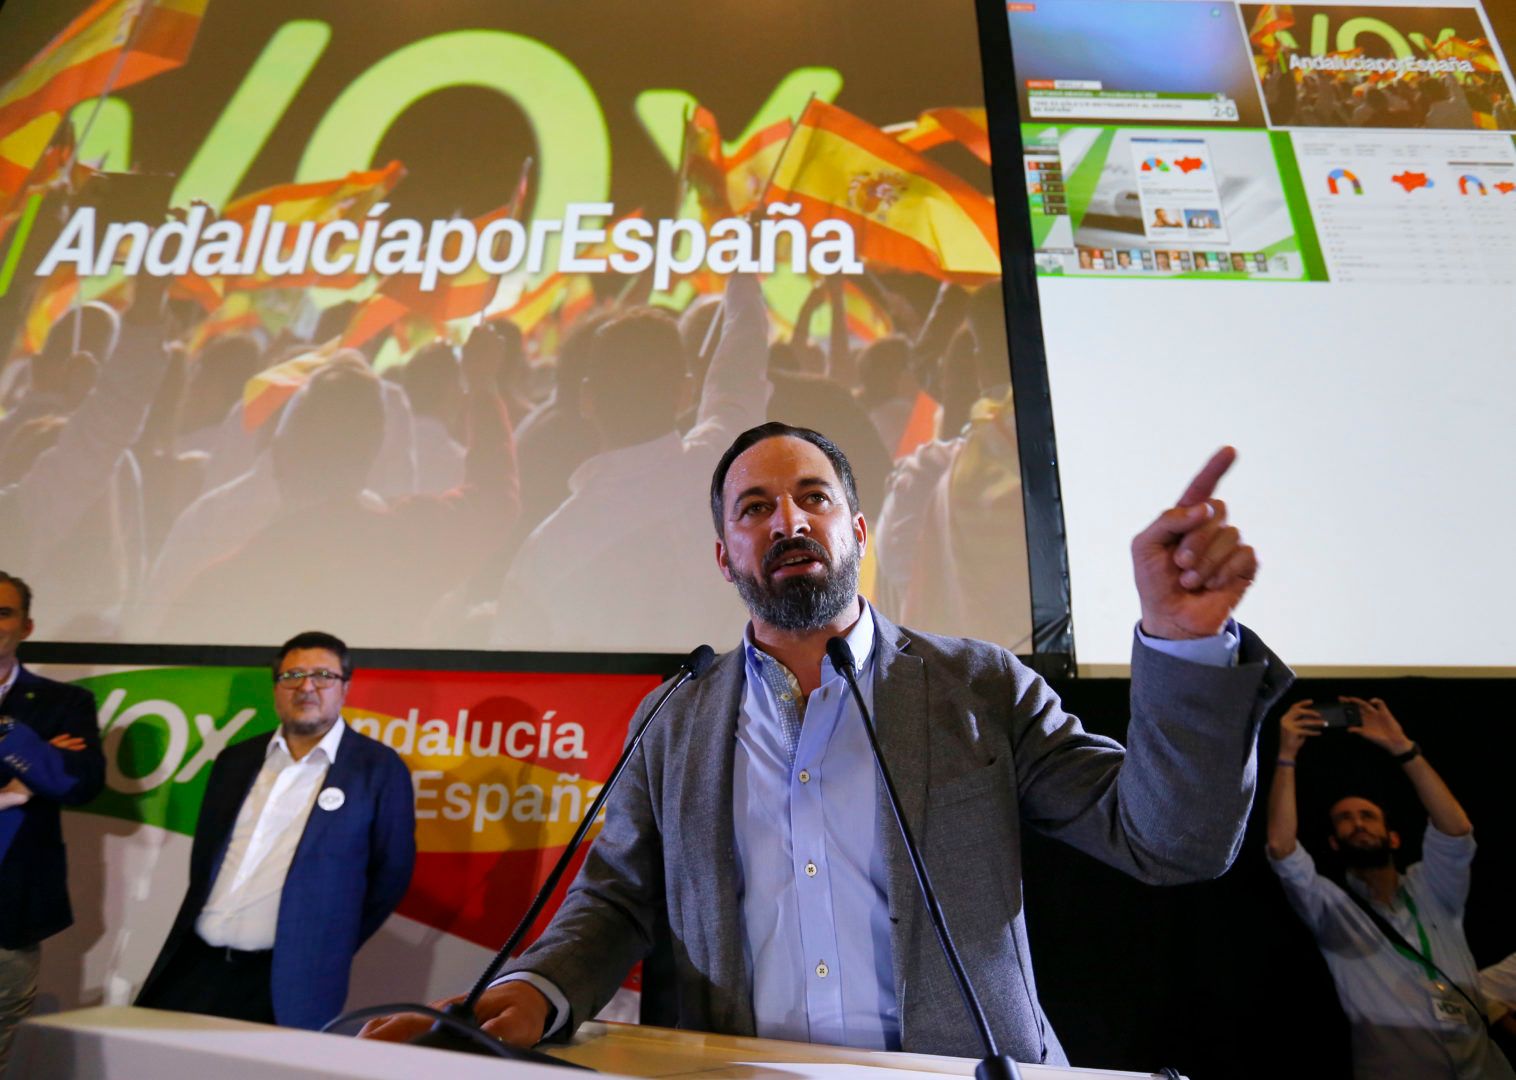 A NEW VOICE MAKES ITSELF HEARD IN SPAIN